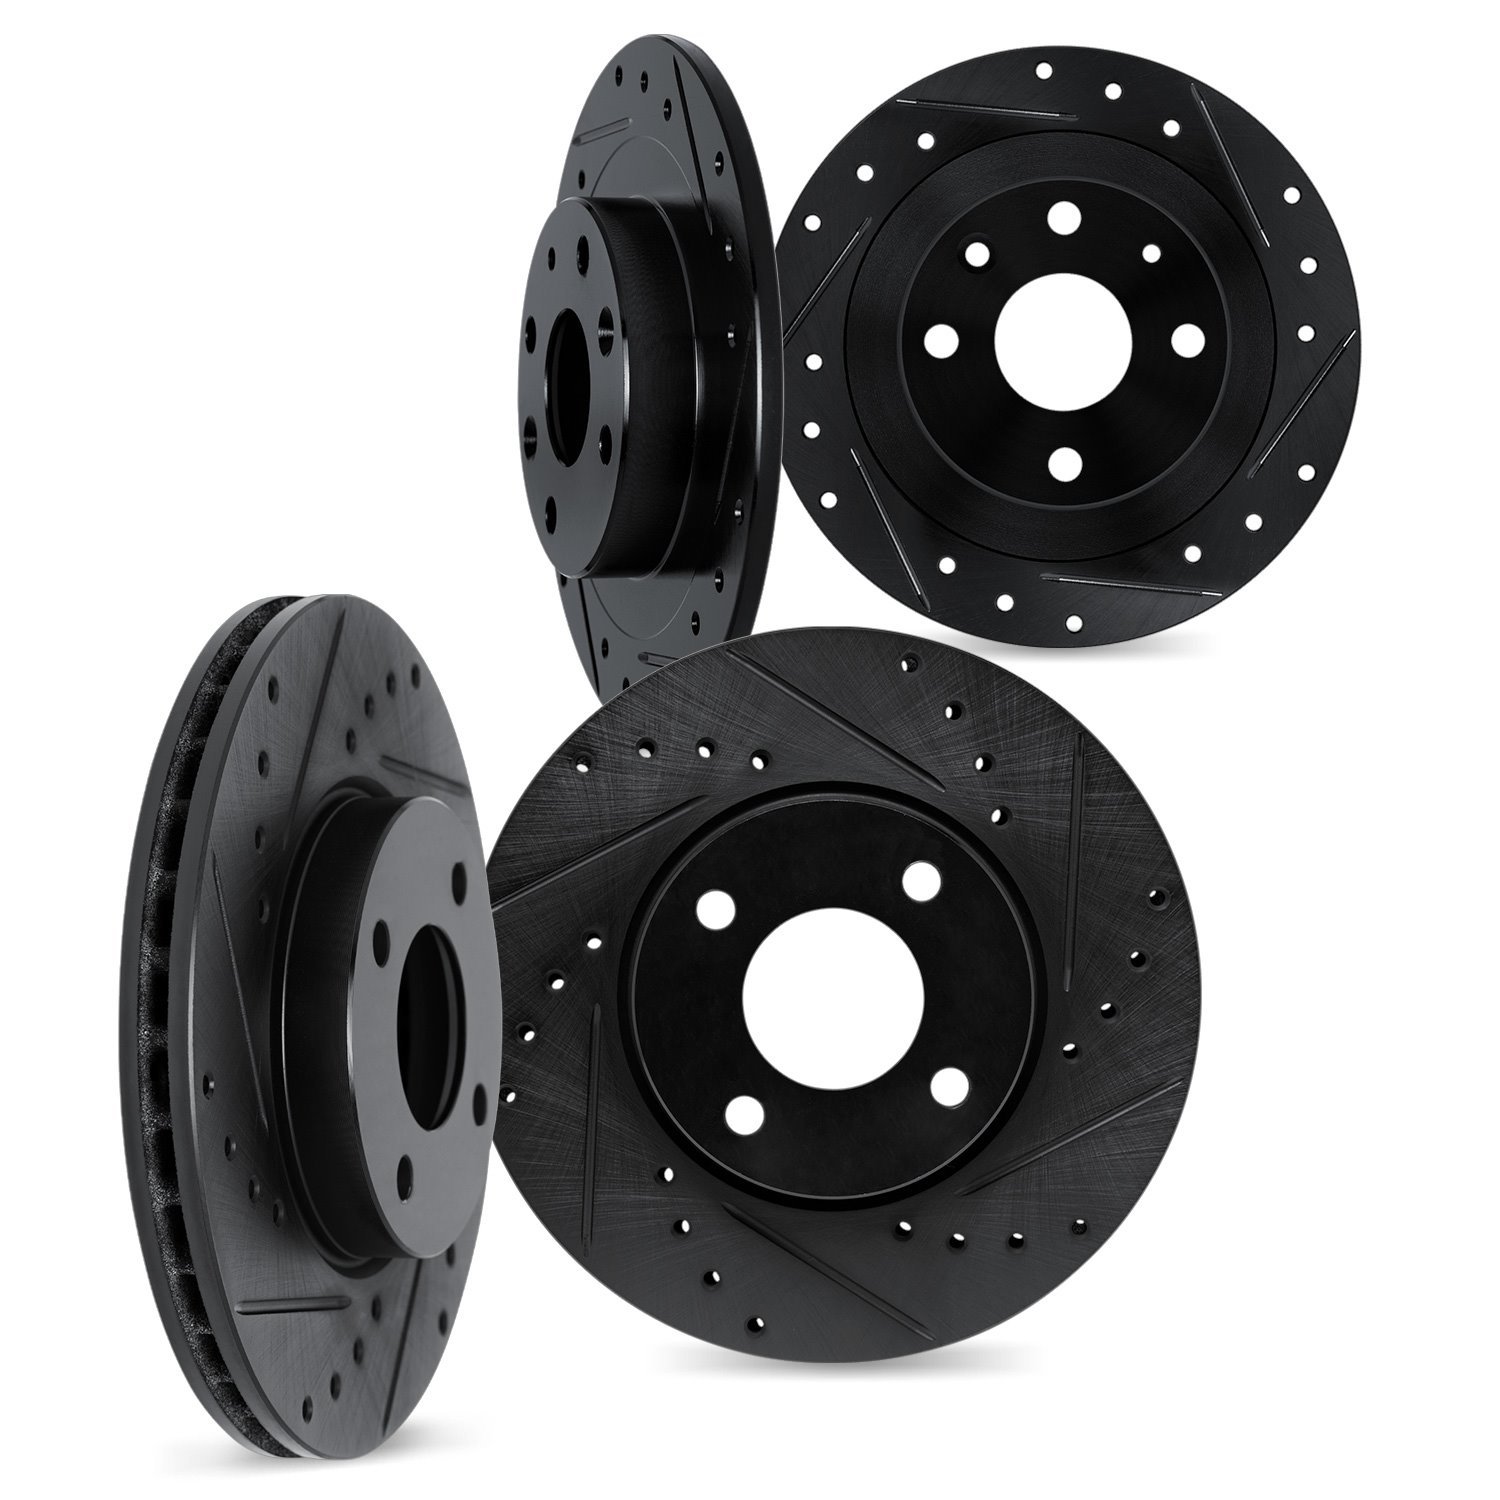 8004-01012 Drilled/Slotted Brake Rotors [Black], 1989-1994 Suzuki, Position: Front and Rear